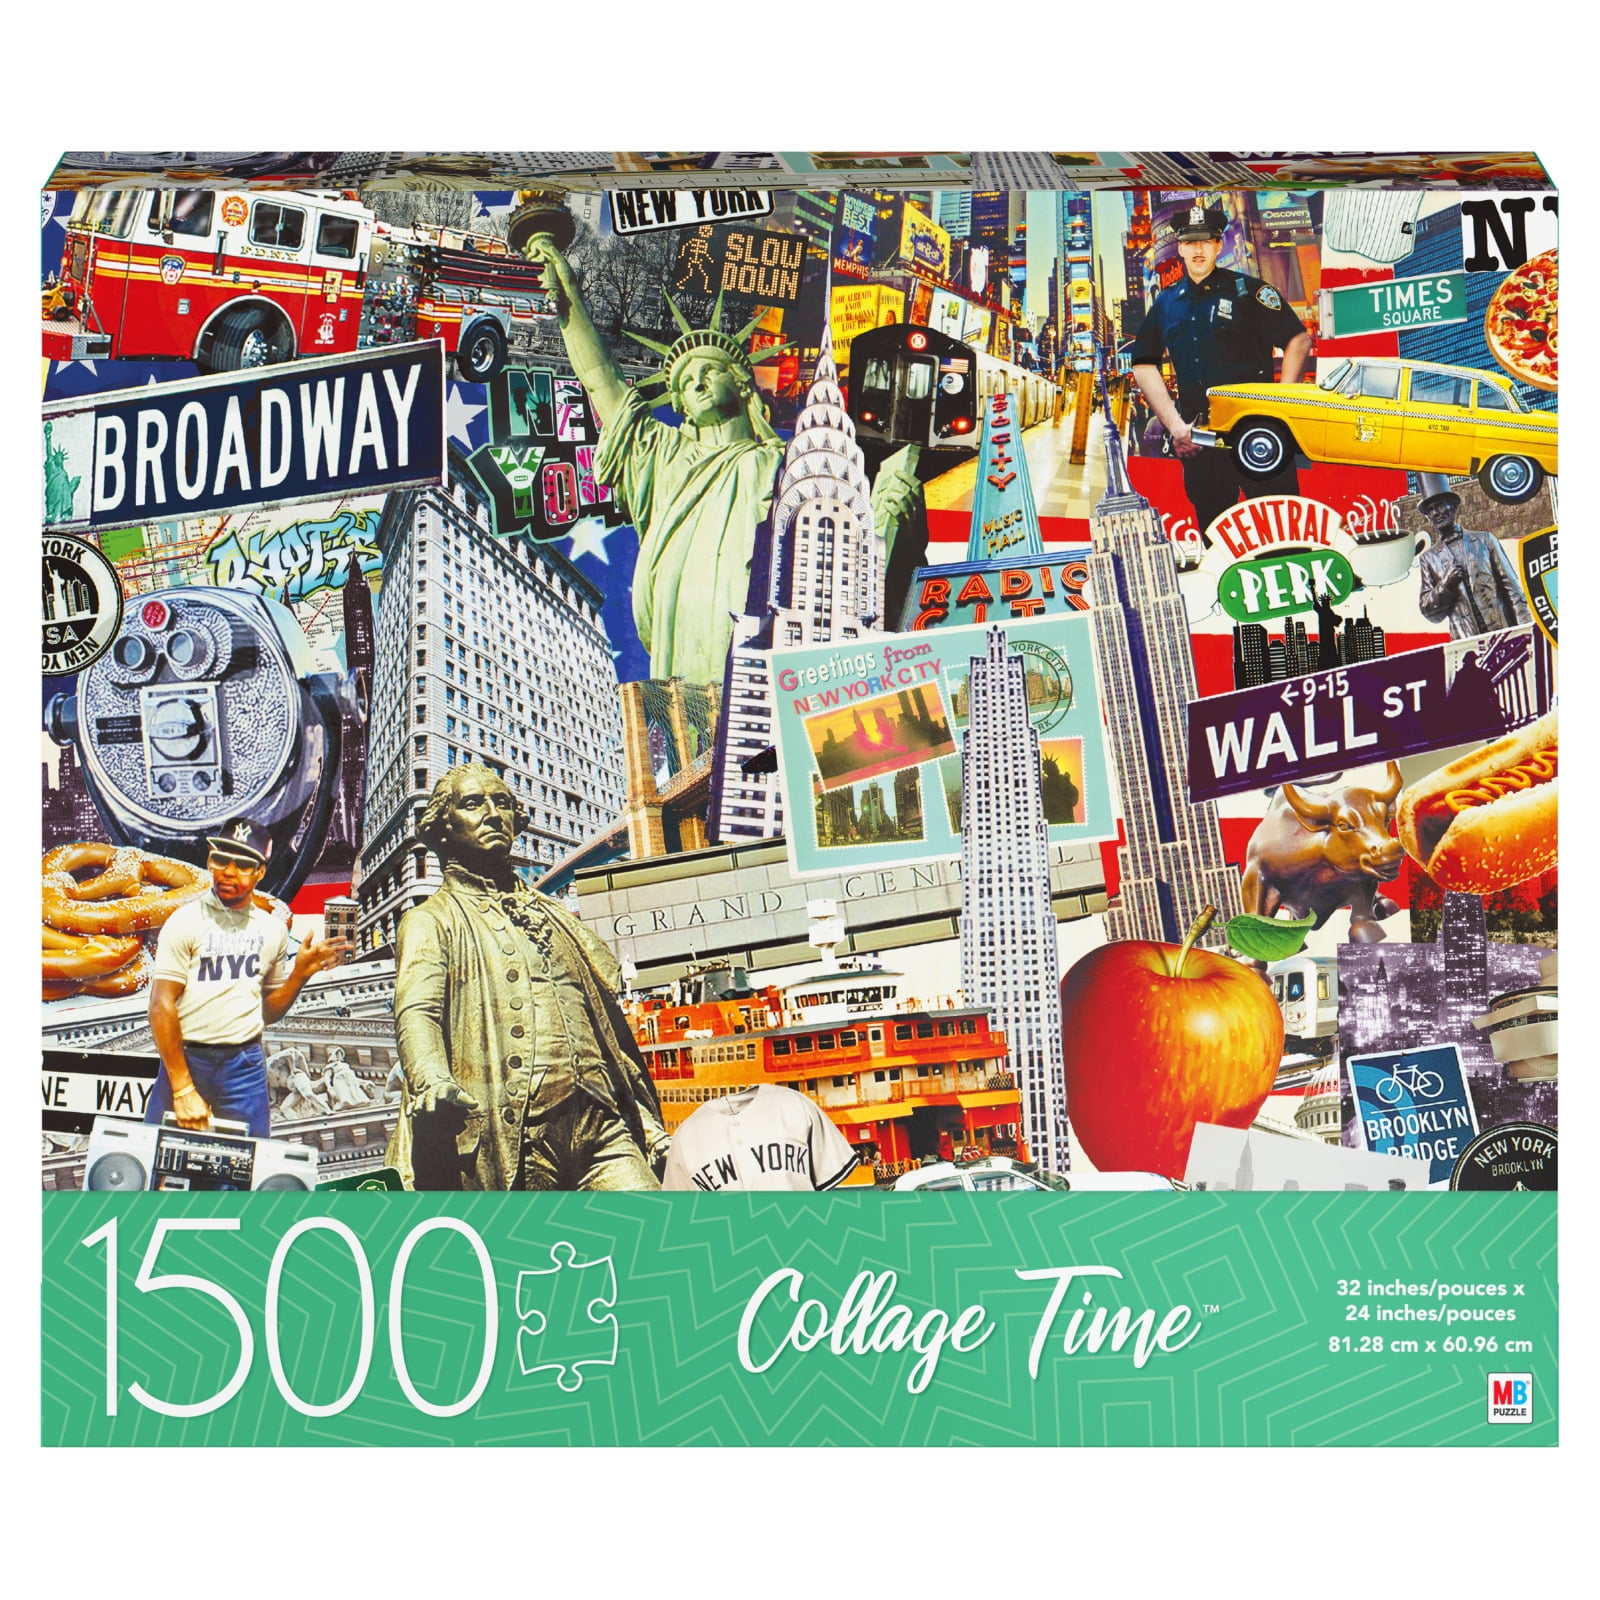 1500 pc Vintage Sports Lover Puzzle Collage Time 32x24 NIB Sealed Free Shipping 